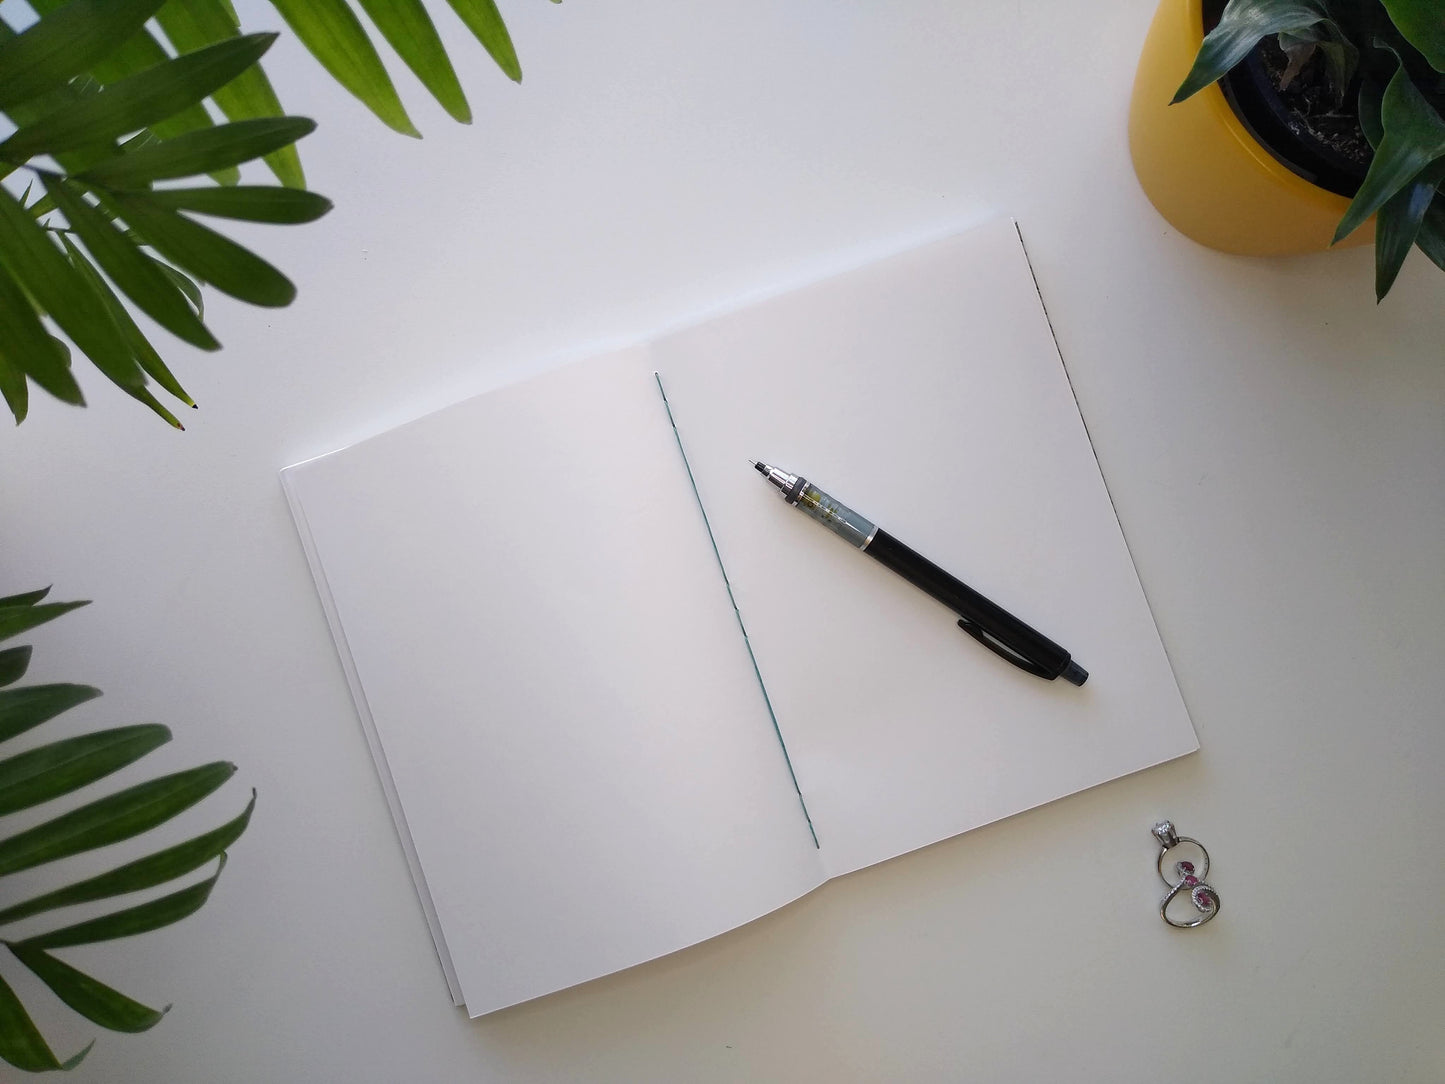 An open journal lays on a white desk next to two potted plants and a pair of rings. The journal has a blue thread connecting the pages at the spine and a black mechanical pencil rests across the blank white pages.